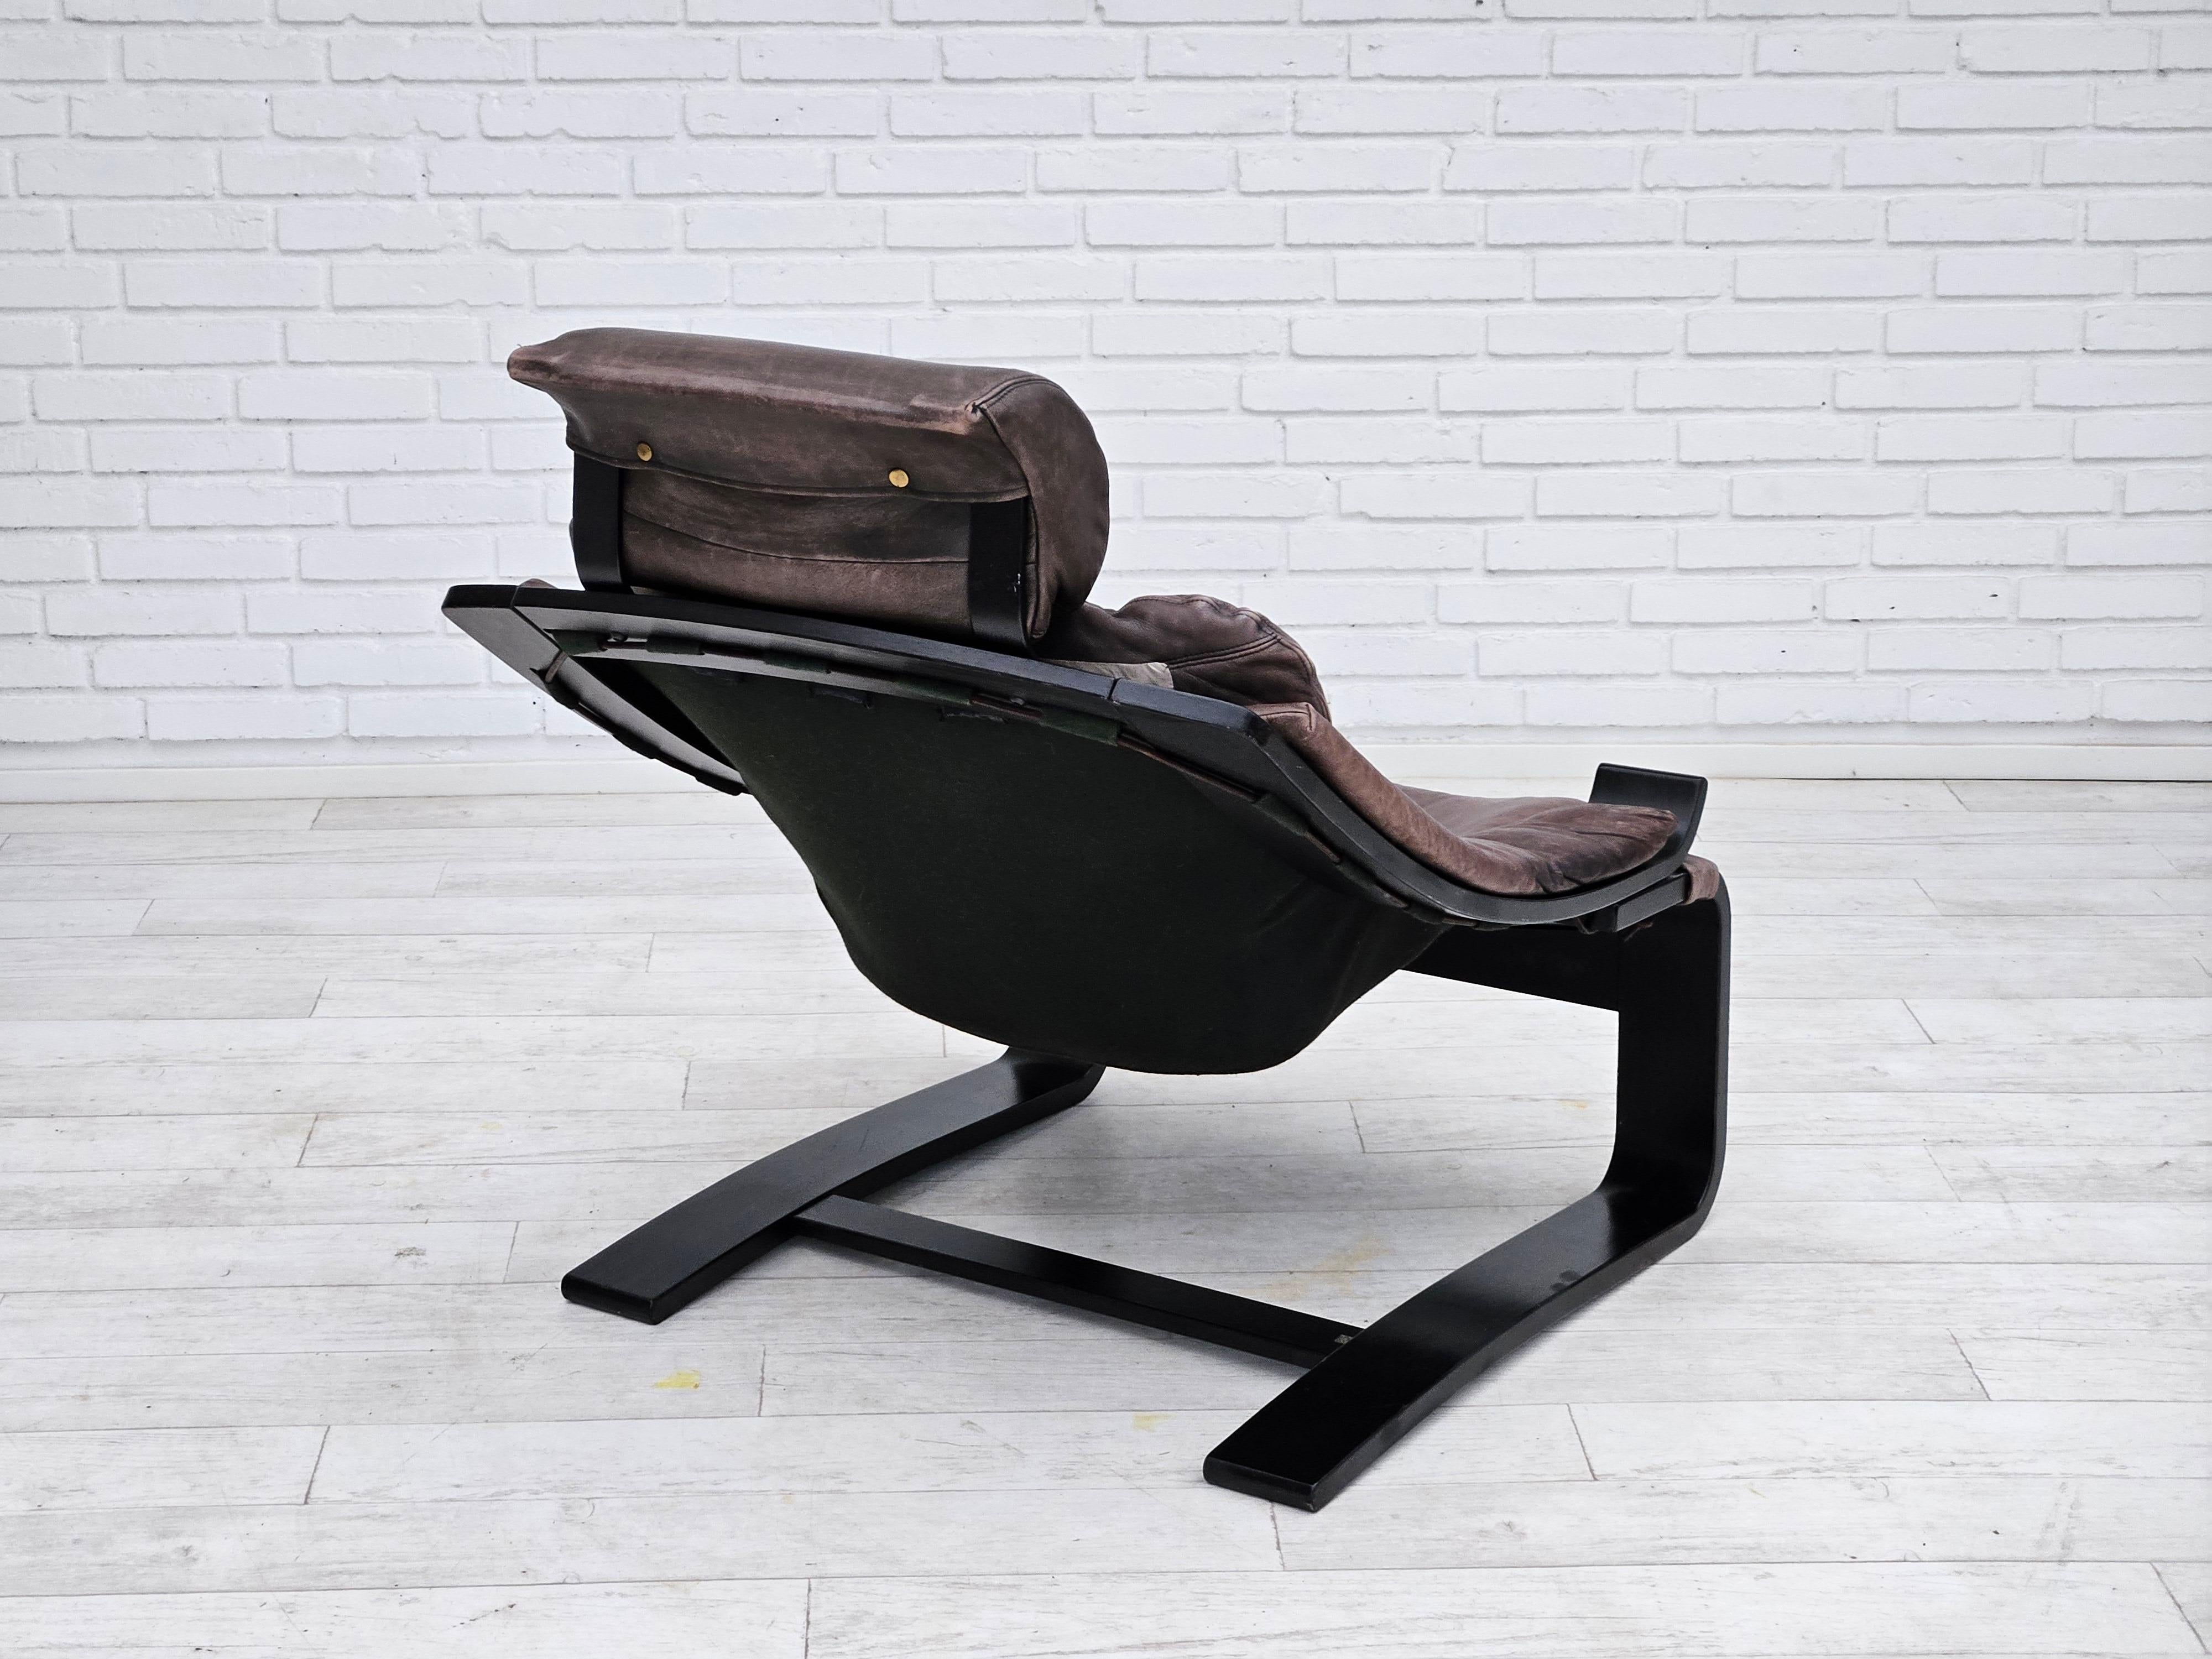 Late 20th Century 1970s, Swedish design by Ake Fribyter for Nelo, Kroken lounge chair, original. For Sale